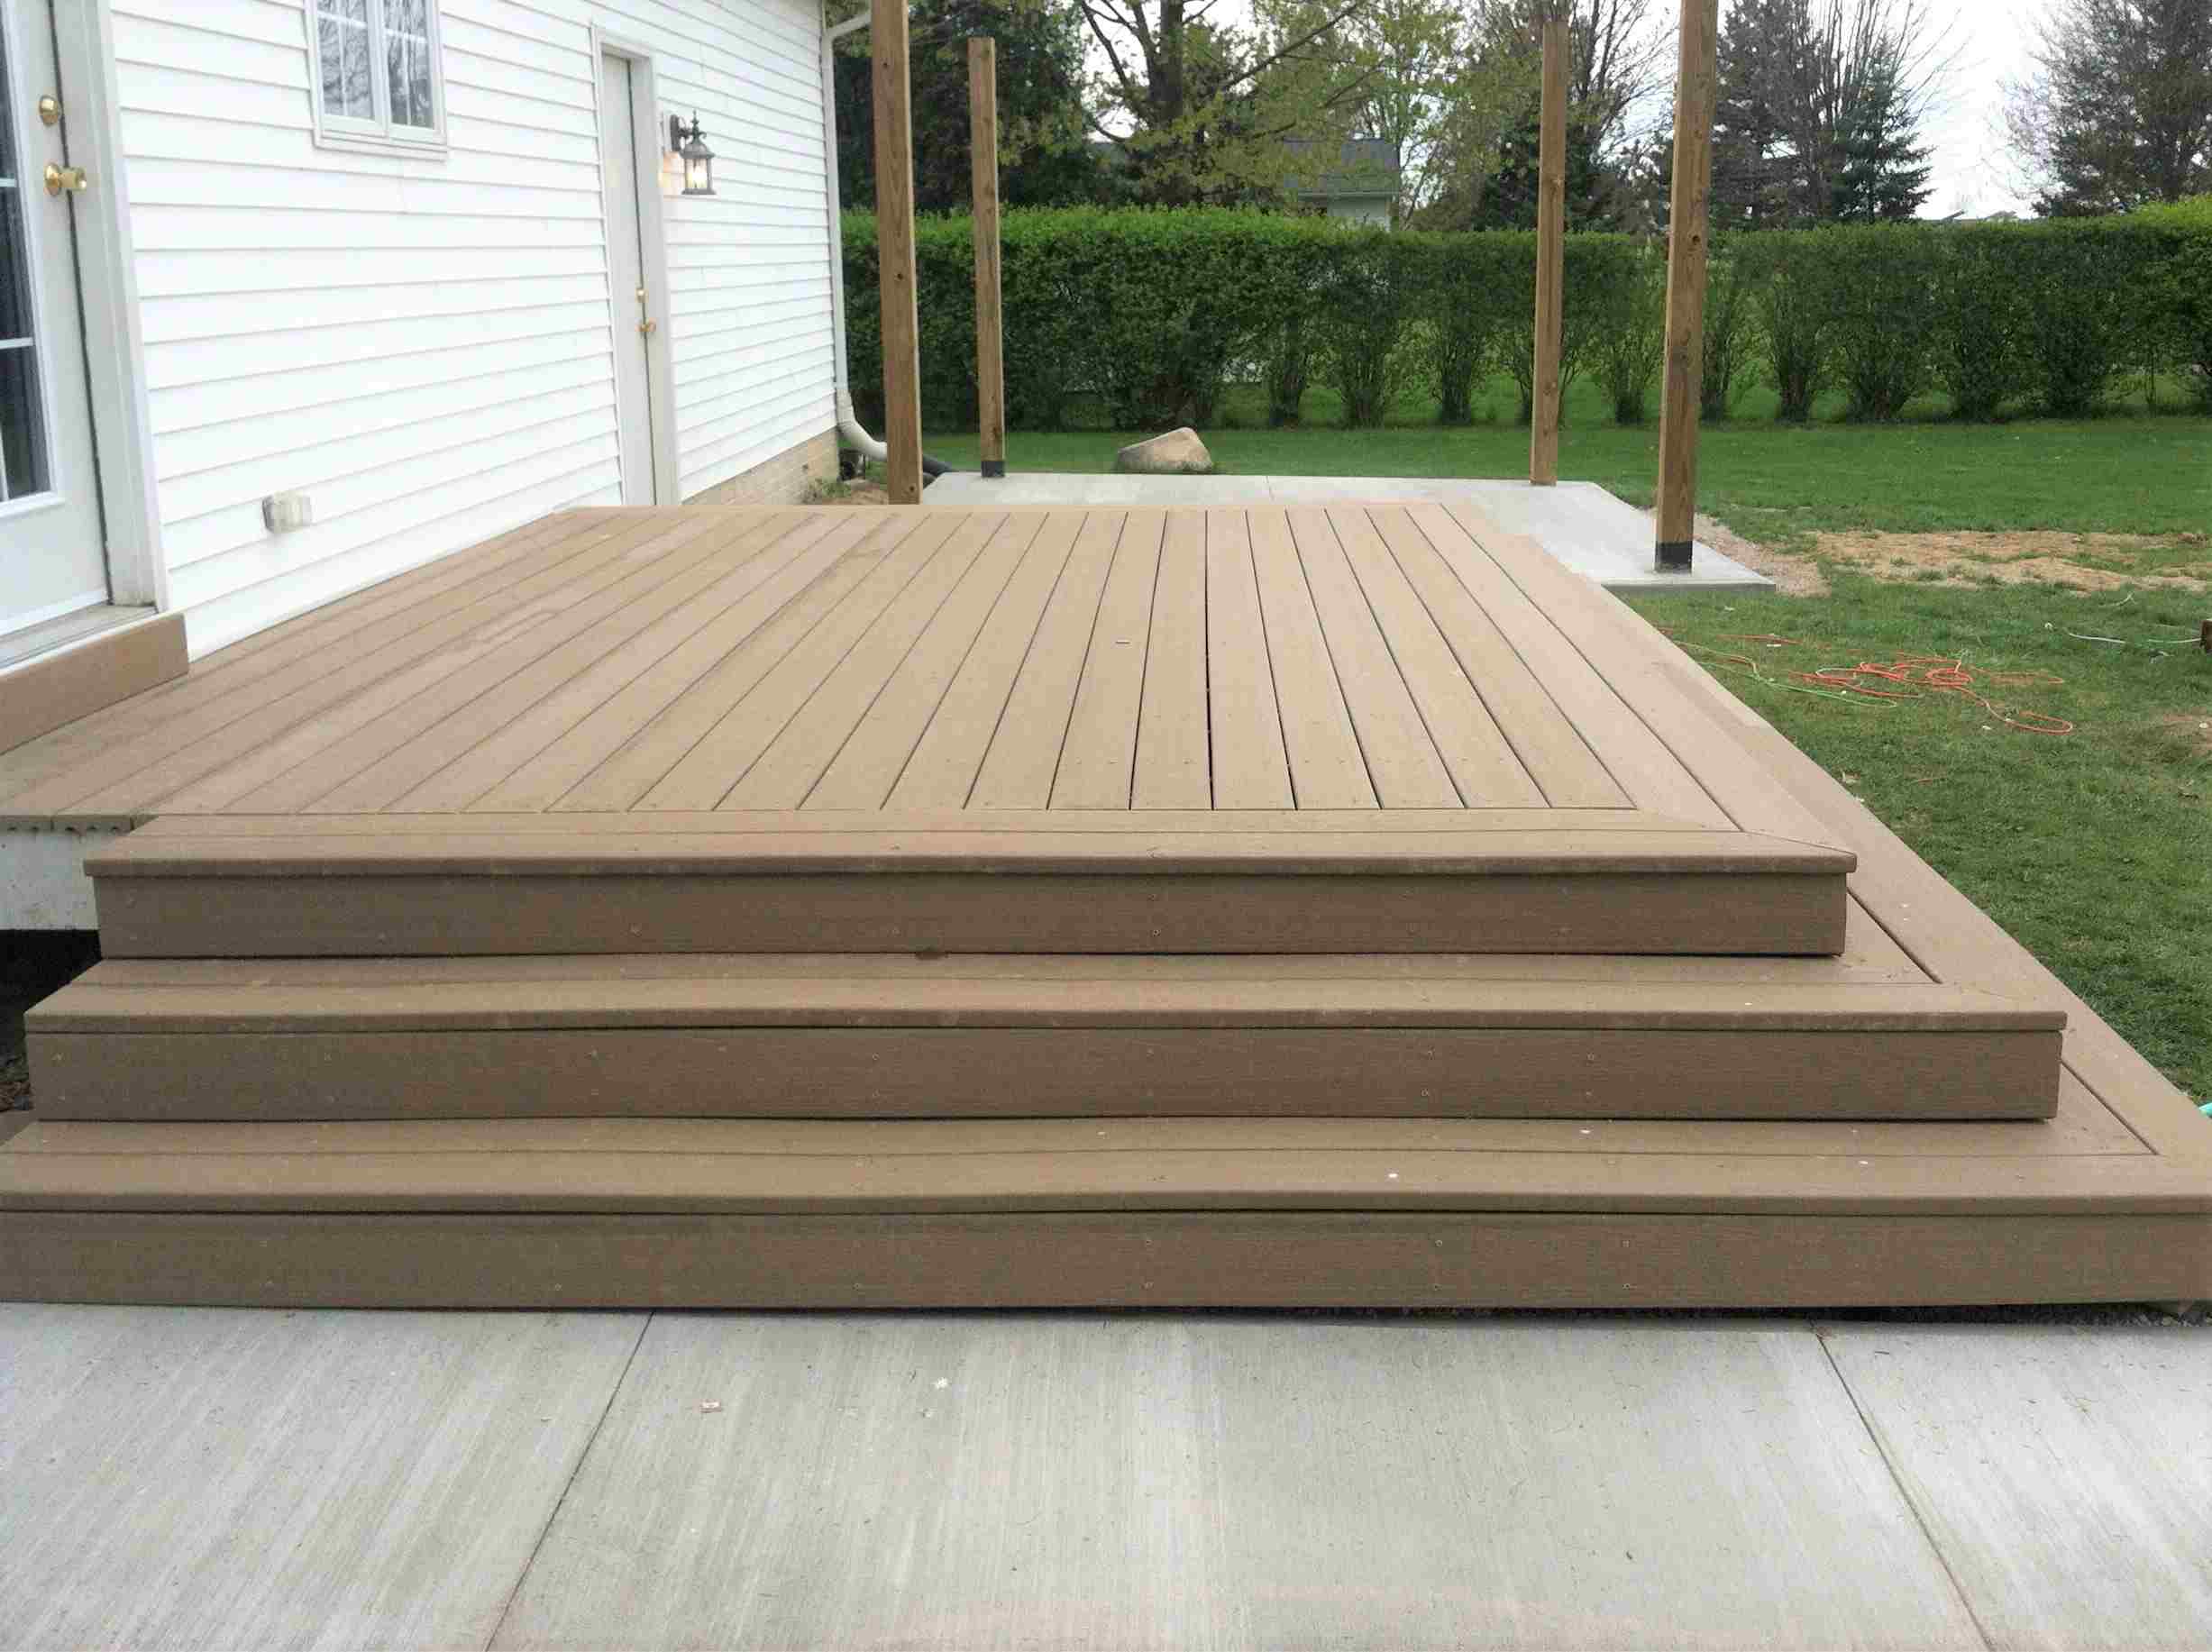 How To Build Wide Deck Steps For A Grand Backyard Entrance